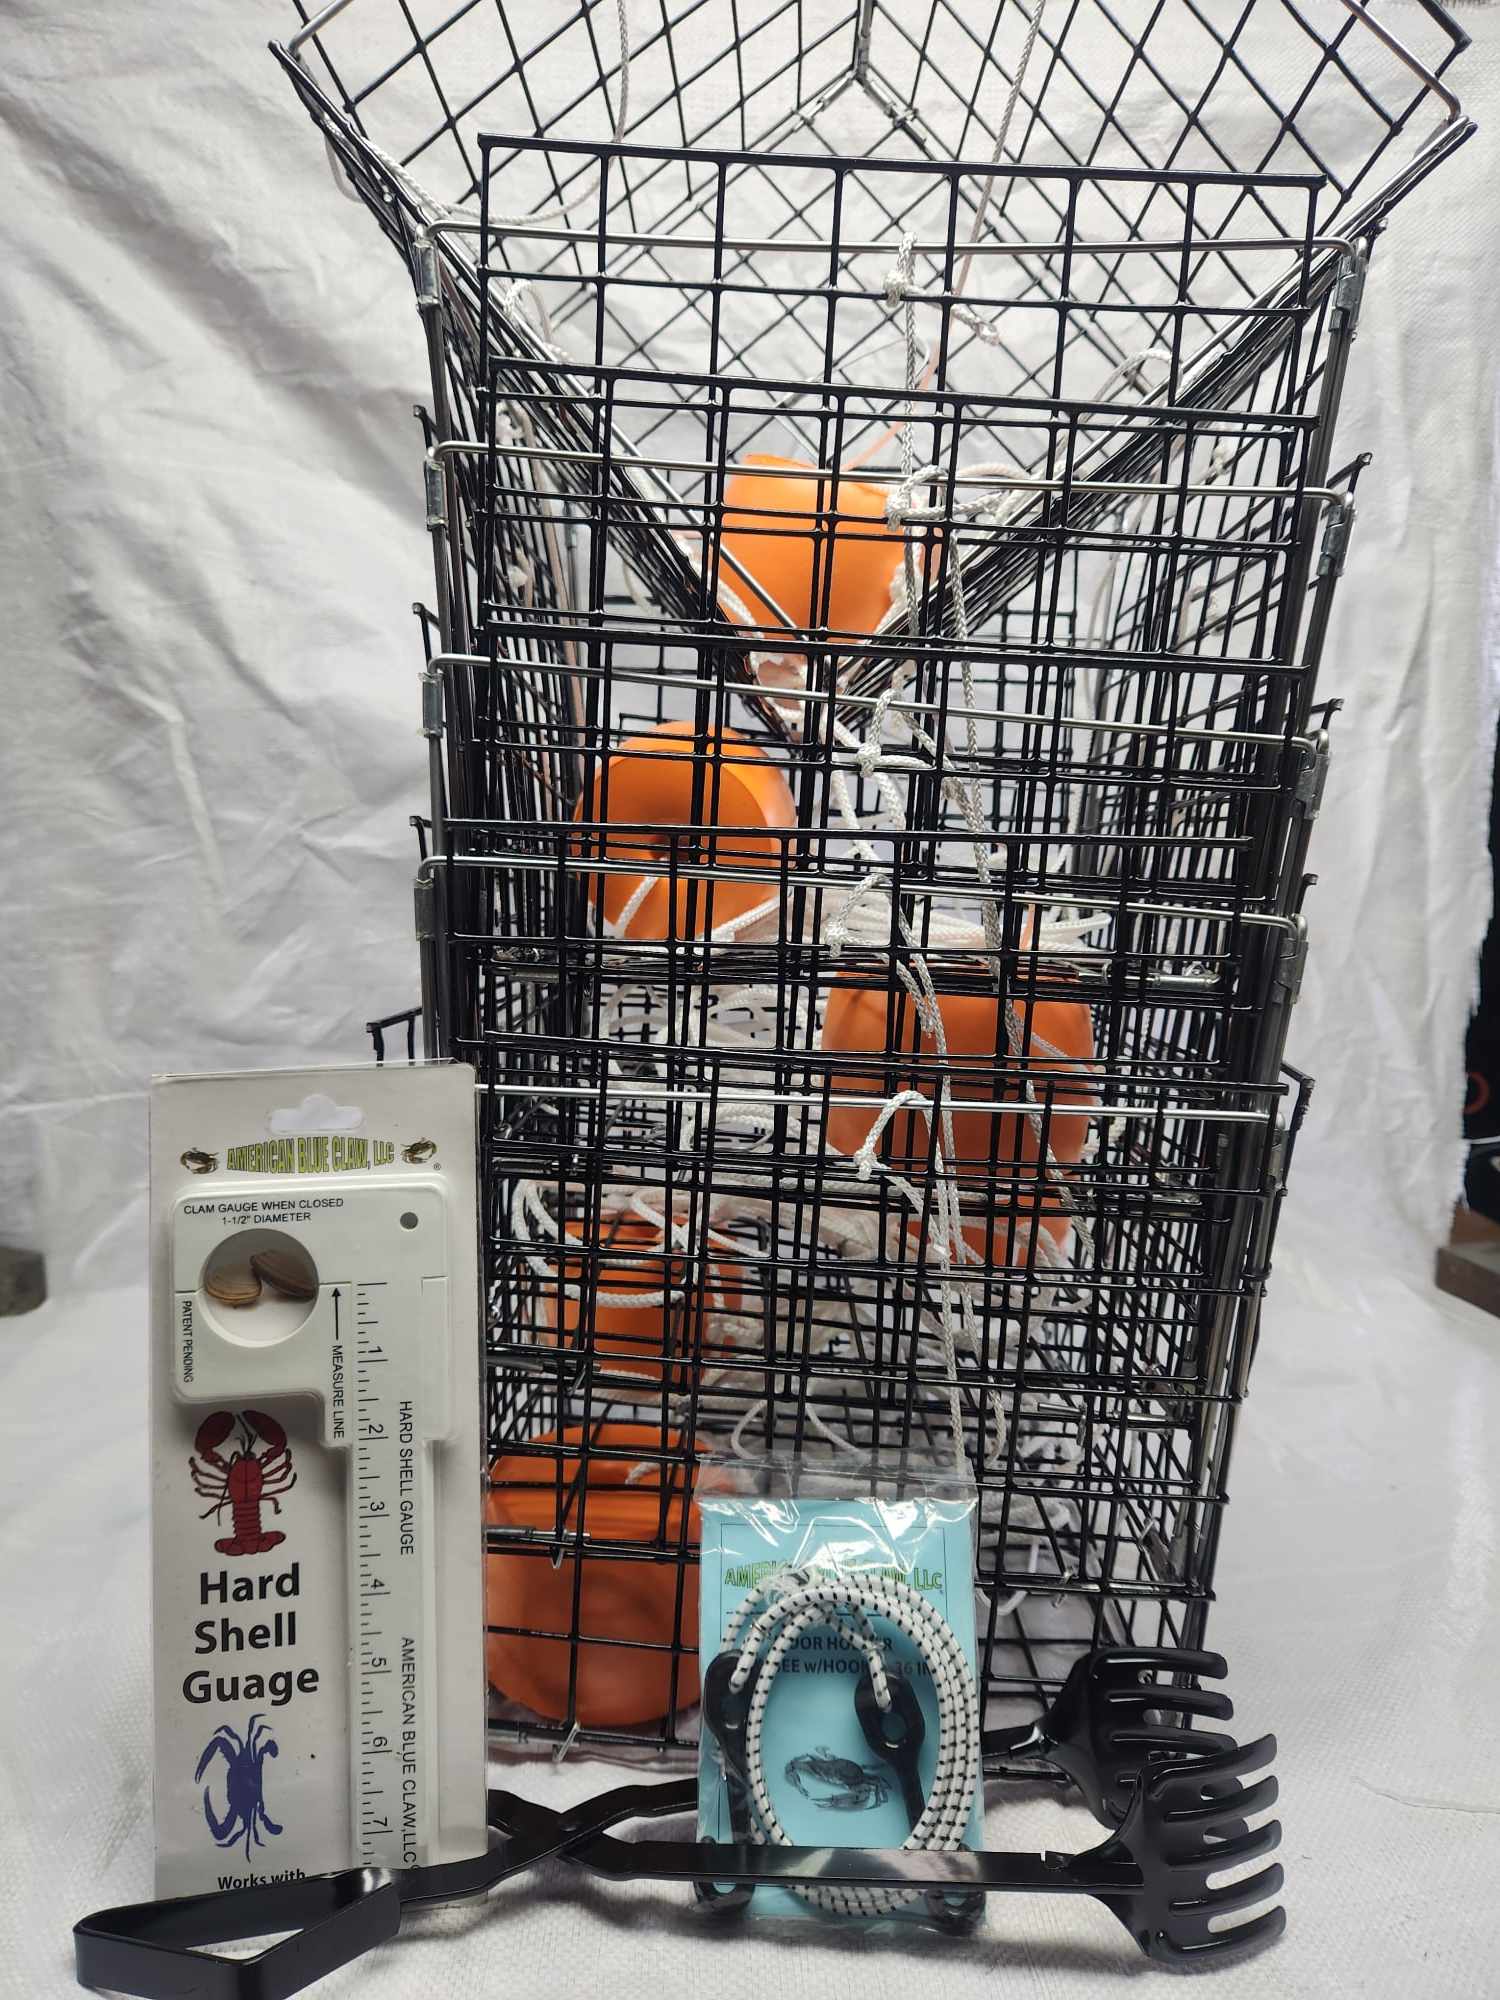 American Blue Claw Crabbing Equipment: 6 Topless Traps, Crab Tong